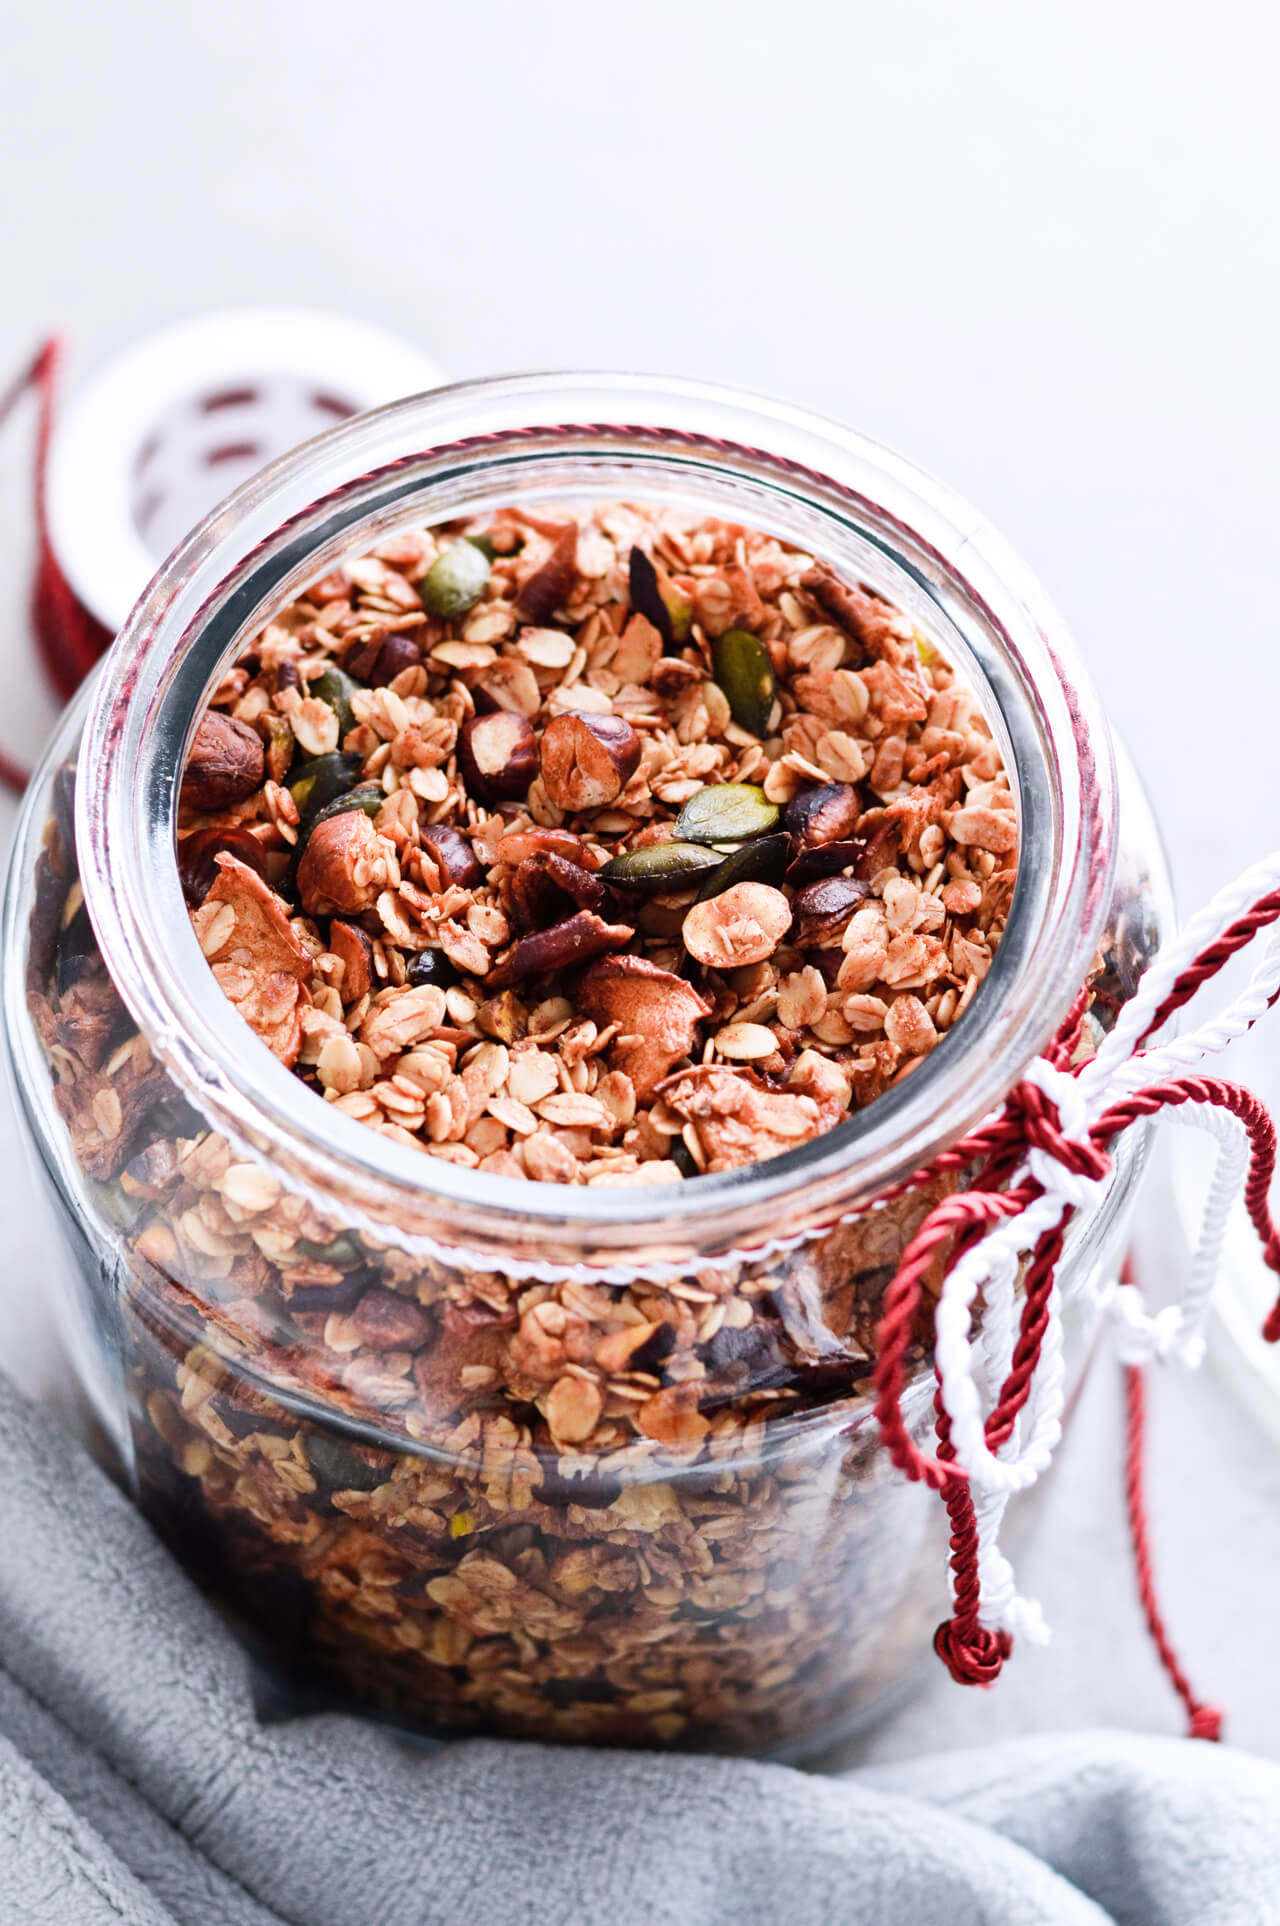 Recipe for Cinnamon apple pistachio soft granola, packed with hazelnuts, sunflower seeds, maple syrup and honey, it is a real treat that makes breakfast wonderful. A jar of granola can also be a great homemade gift. | @mitzyathome sugarsalted.com